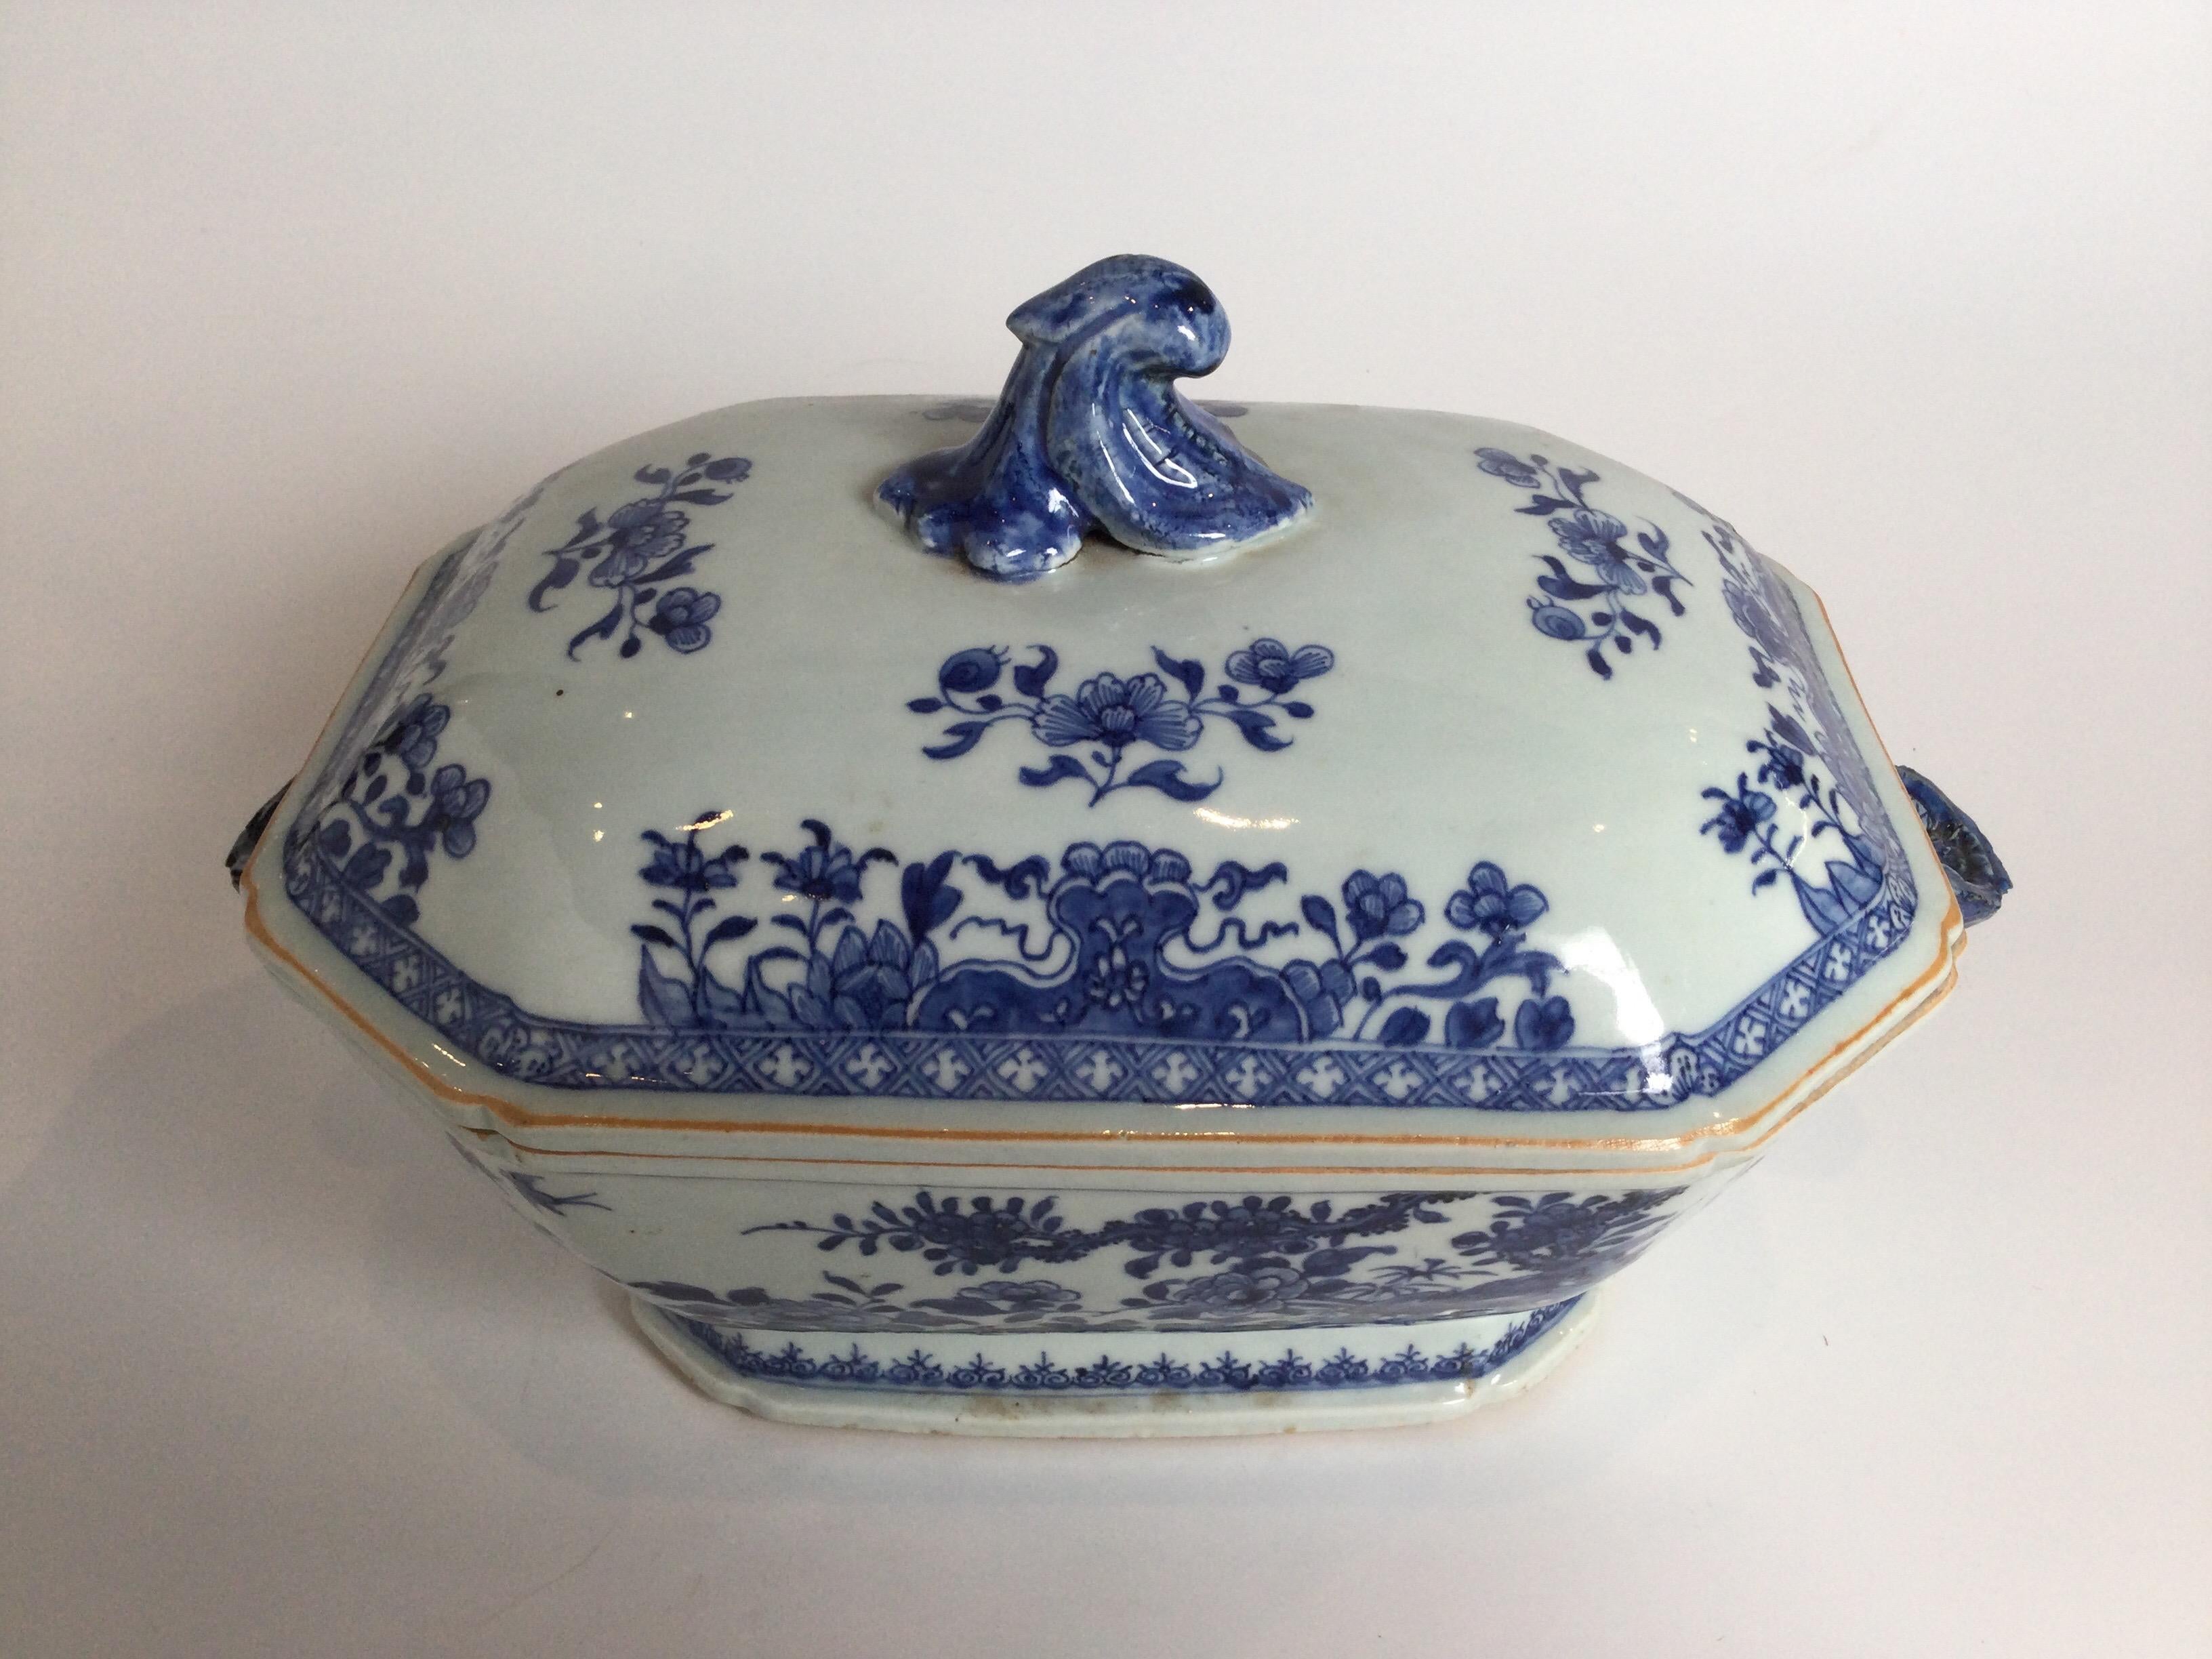 Elegant circa 1790 Nanking Chinese porcelain hand painted blue and white tureen in excellent condition, no repairs.